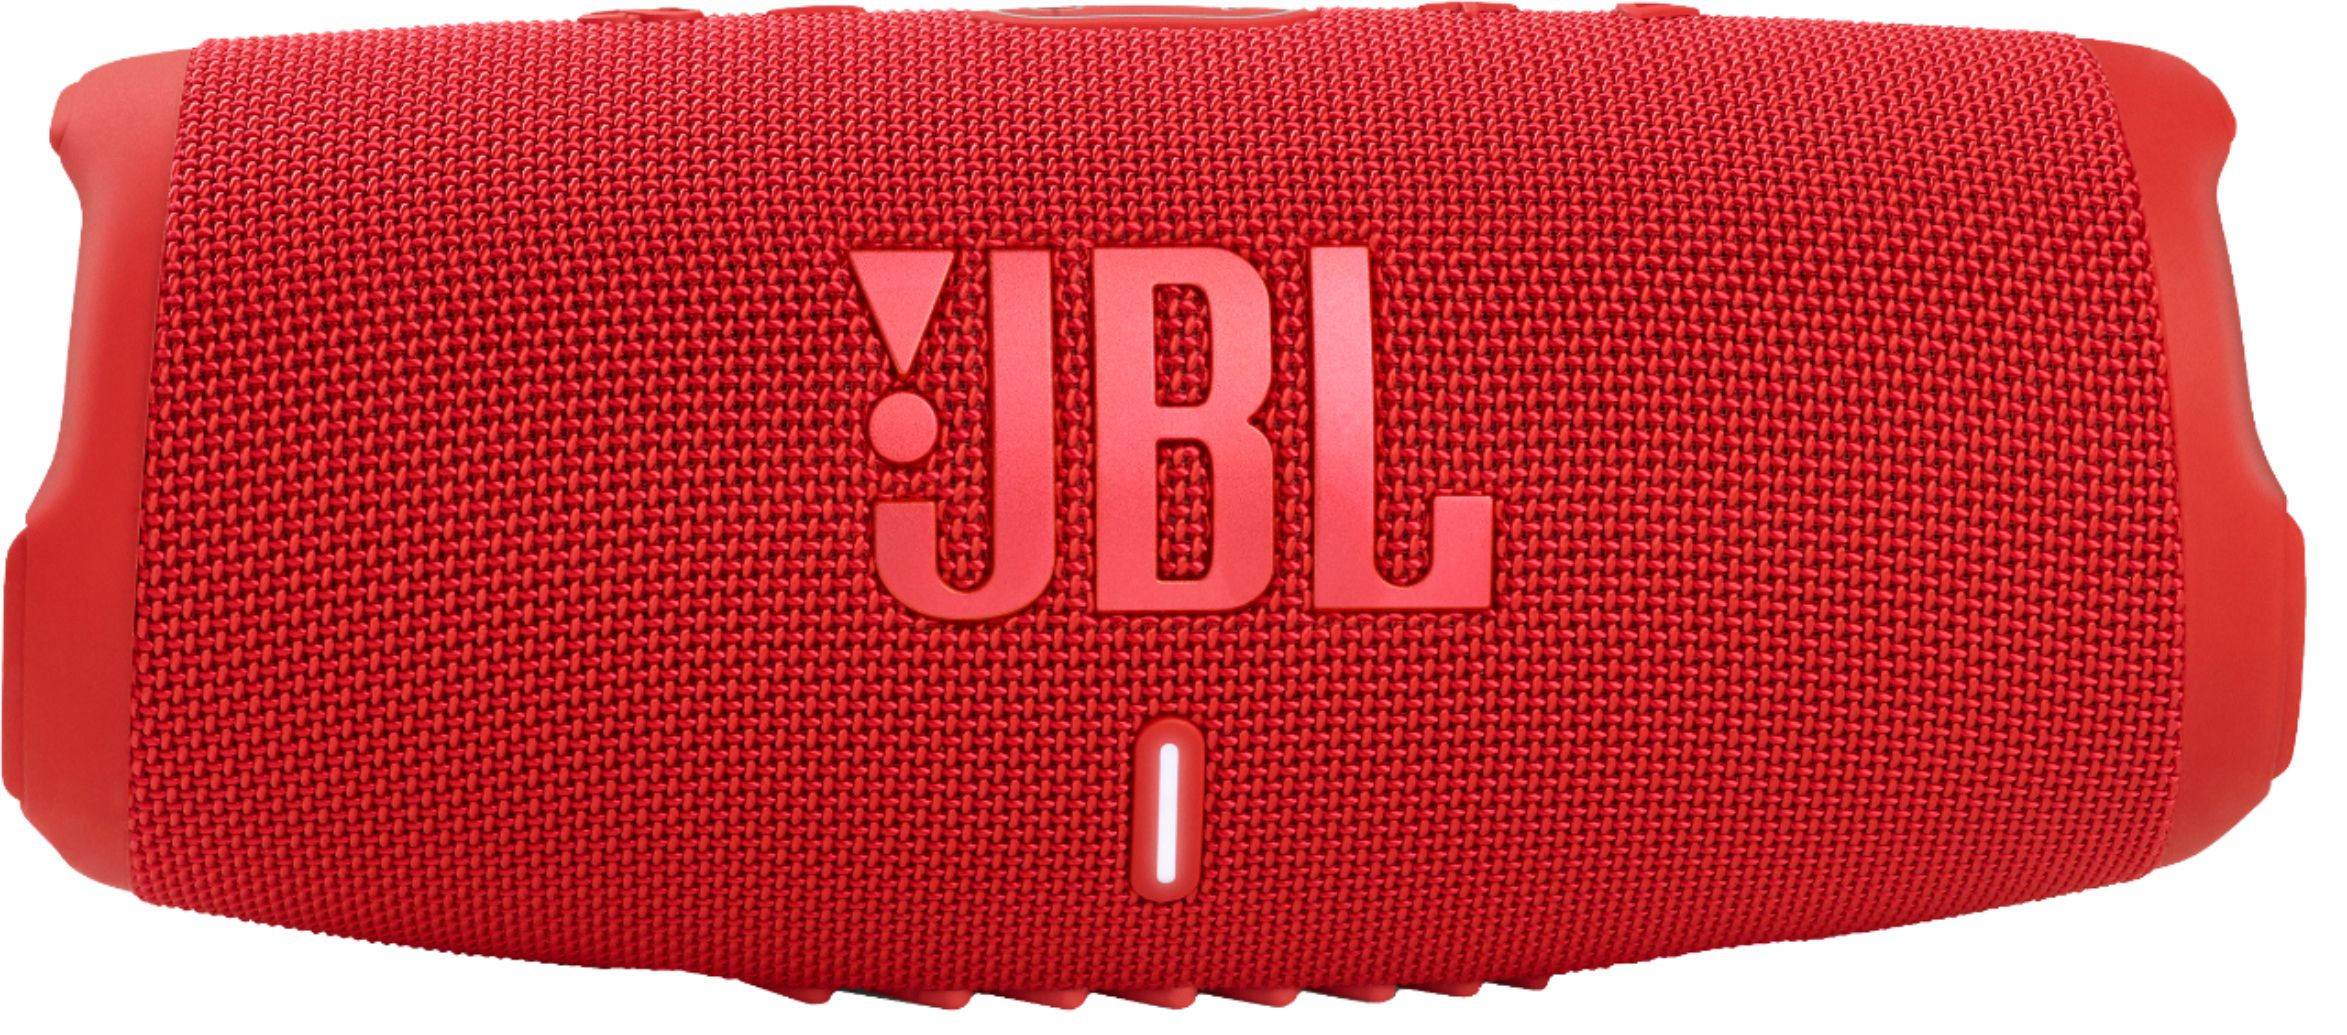 Play Endlessly With The JBL® Charge 5 Portable Bluetooth Speaker